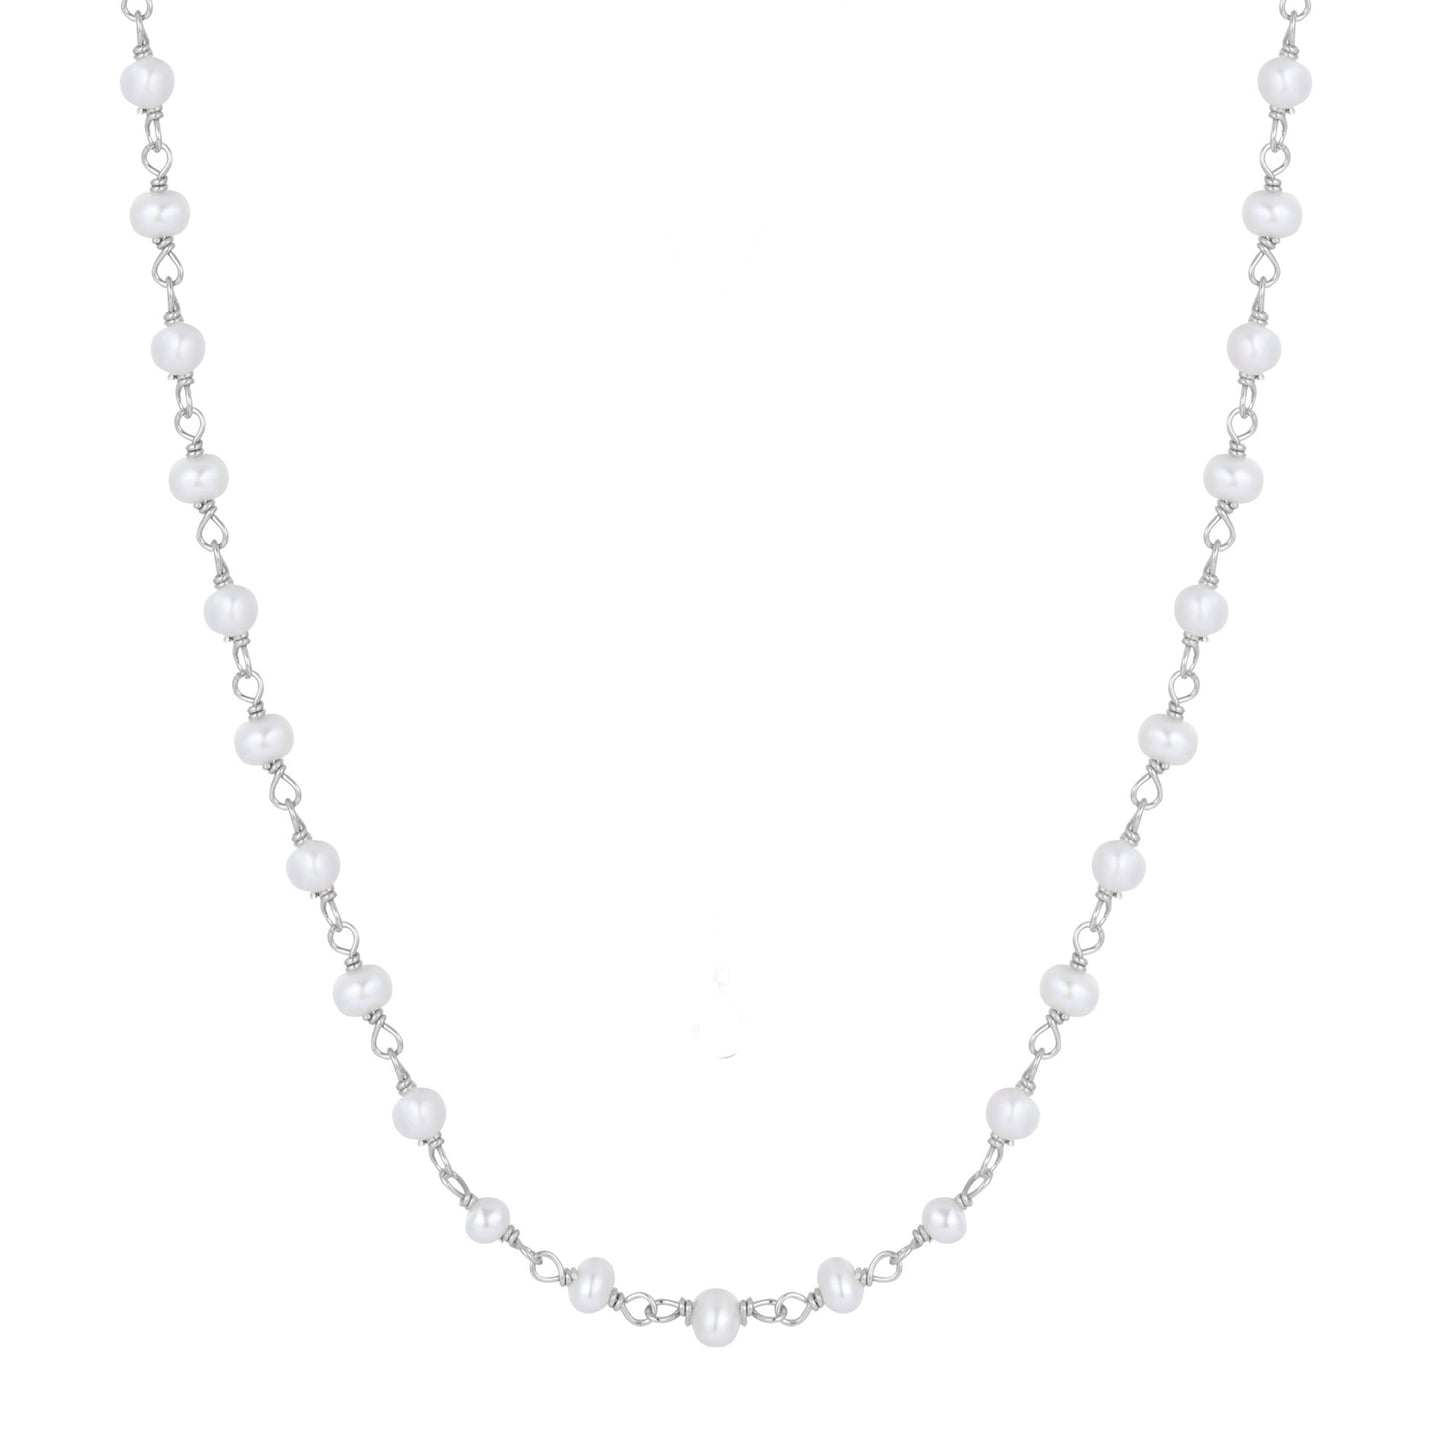 LEI FRESHWATER PEARL SILVER NECKLACE